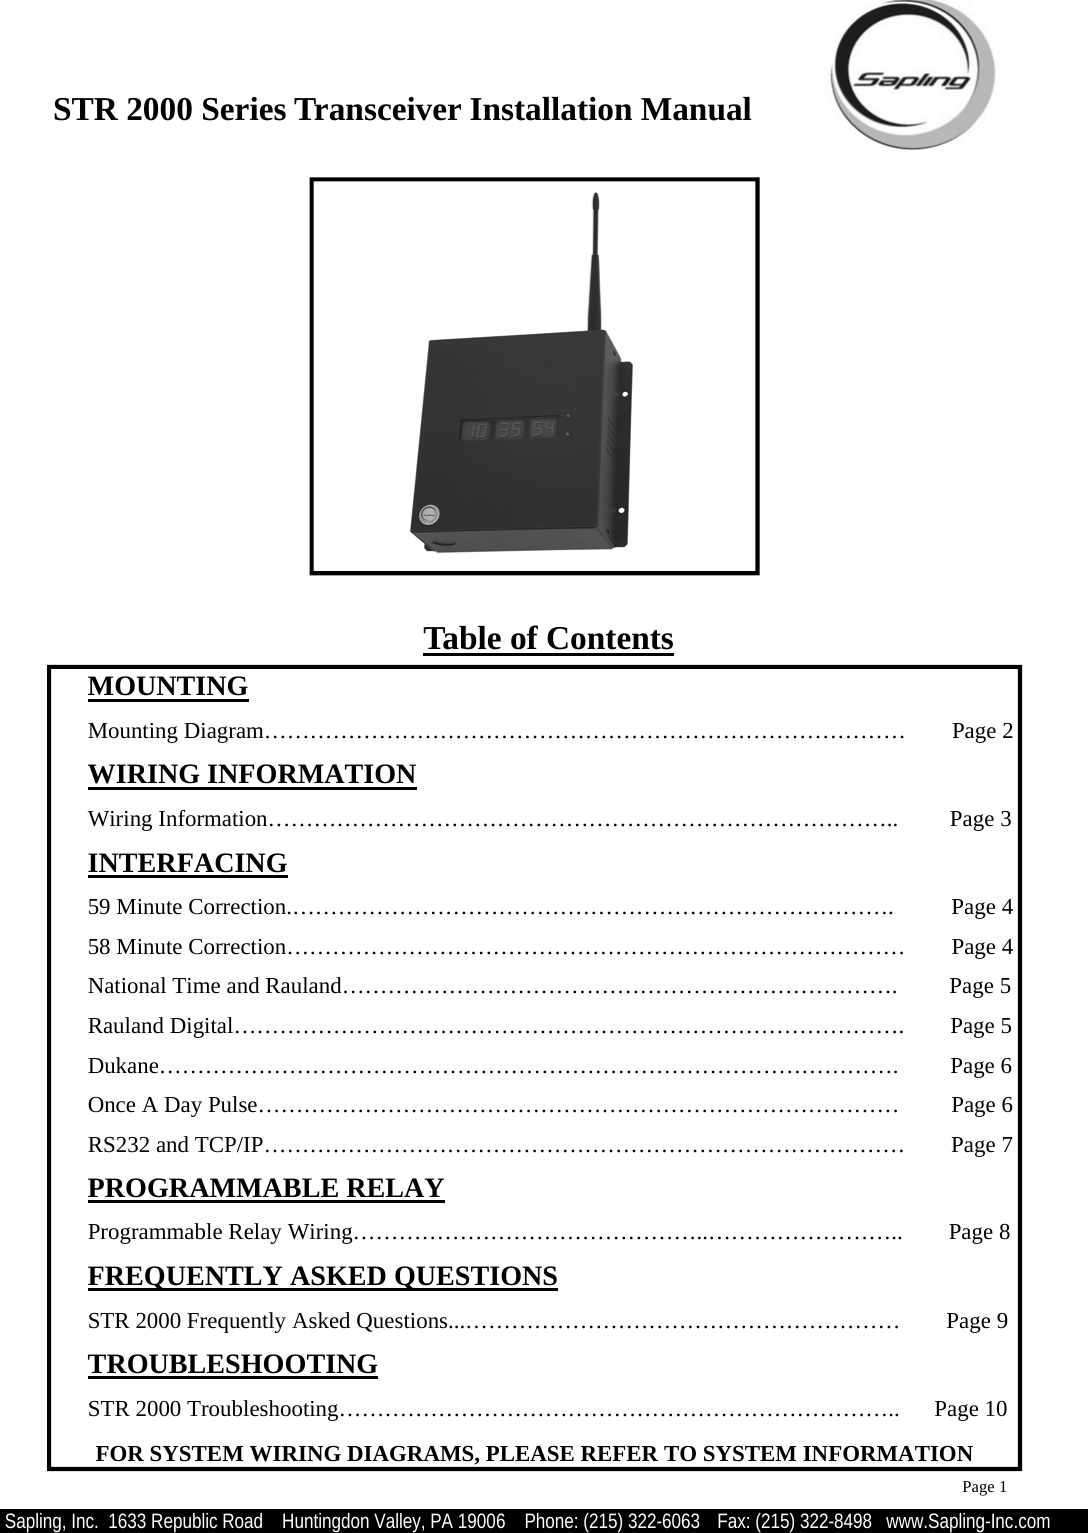 STR 2000 Series Transceiver Installation Manual  Sapling, Inc.  1633 Republic Road    Huntingdon Valley, PA 19006    Phone: (215) 322-6063   Fax: (215) 322-8498   www.Sapling-Inc.com  MOUNTING   Mounting Diagram…………………………………………………………………………        Page 2  WIRING INFORMATION   Wiring Information………………………………………………………………………..         Page 3  INTERFACING   59 Minute Correction.…………………………………………………………………….          Page 4   58 Minute Correction………………………………………………………………………        Page 4   National Time and Rauland……………………………………………………………….         Page 5   Rauland Digital…………………………………………………………………………….        Page 5   Dukane…………………………………………………………………………………….         Page 6   Once A Day Pulse…………………………………………………………………………         Page 6   RS232 and TCP/IP…………………………………………………………………………        Page 7  PROGRAMMABLE RELAY   Programmable Relay Wiring………………………………………..……………………..        Page 8  FREQUENTLY ASKED QUESTIONS   STR 2000 Frequently Asked Questions...…………………………………………………        Page 9  TROUBLESHOOTING   STR 2000 Troubleshooting………………………………………………………………..      Page 10 Page 1 Table of Contents FOR SYSTEM WIRING DIAGRAMS, PLEASE REFER TO SYSTEM INFORMATION 